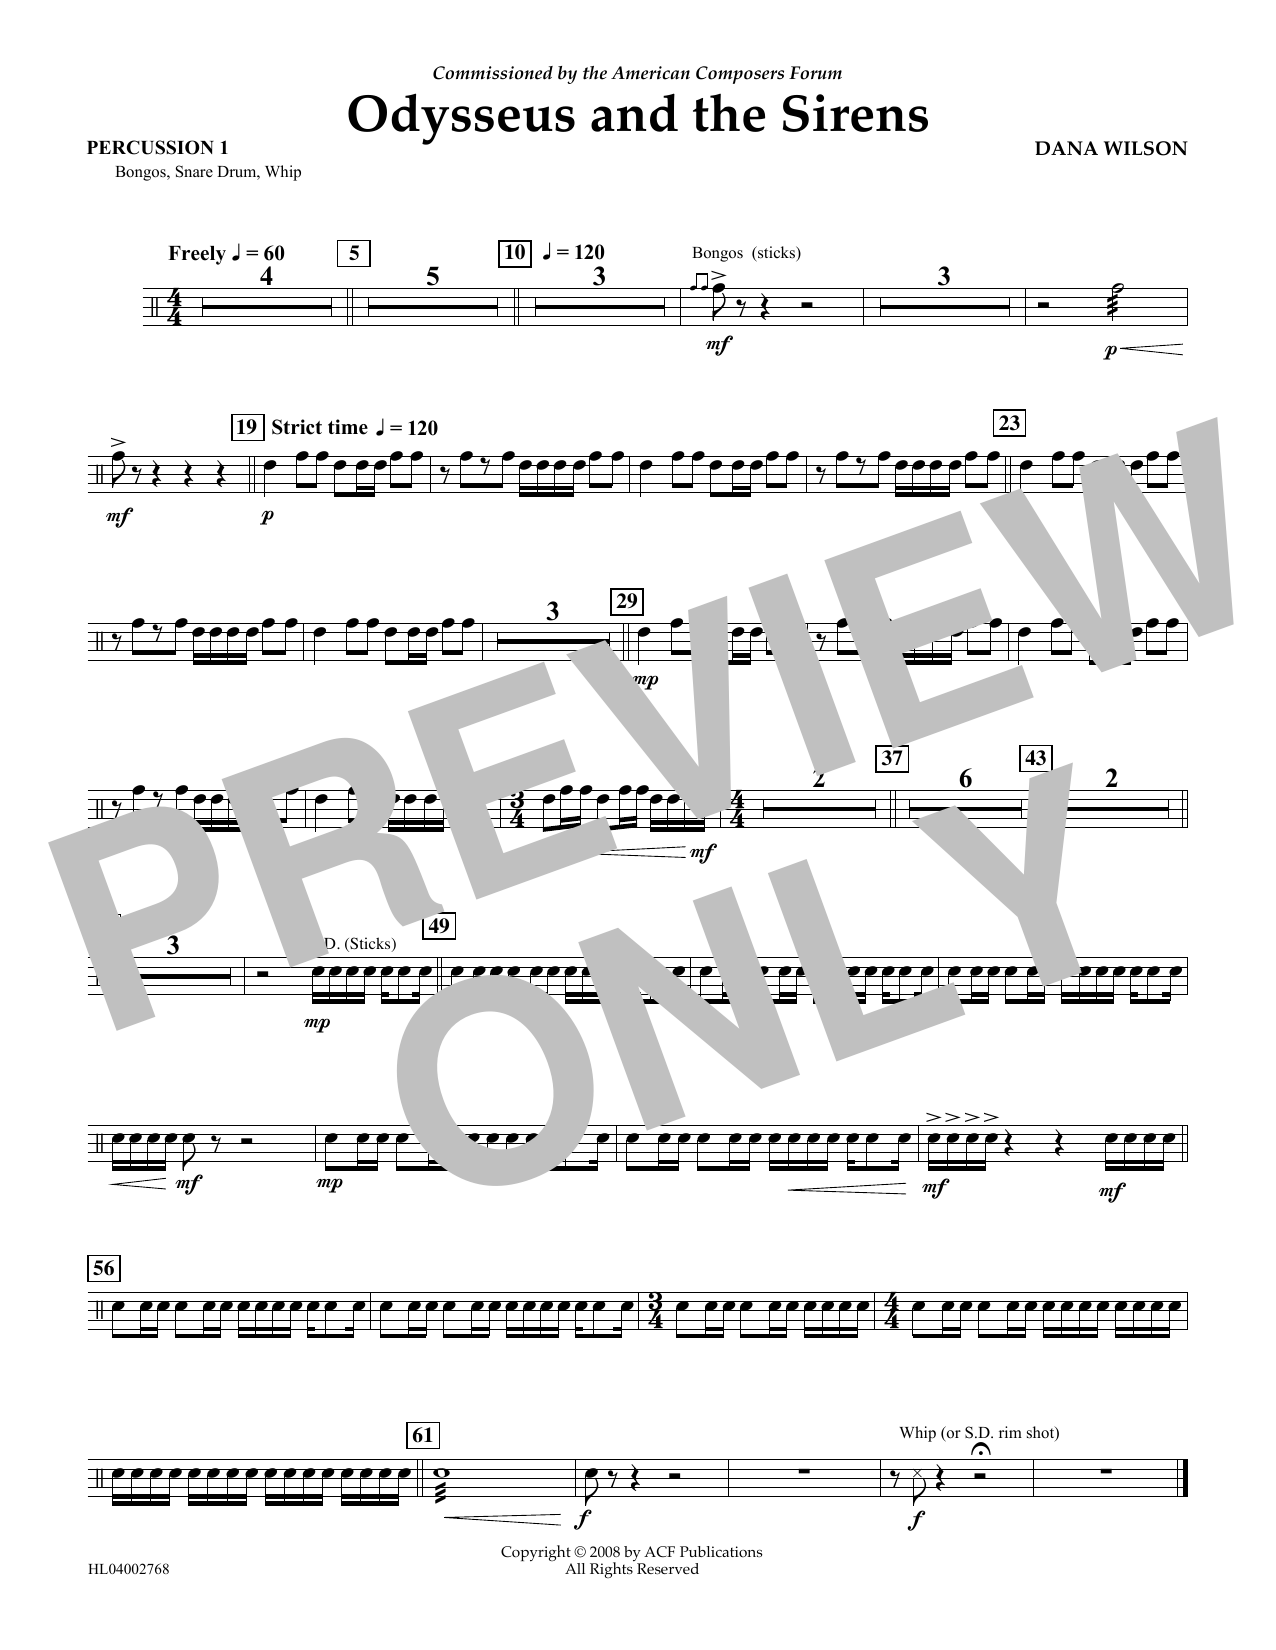 Download Dana Wilson Odysseus and the Sirens - Percussion 1 Sheet Music